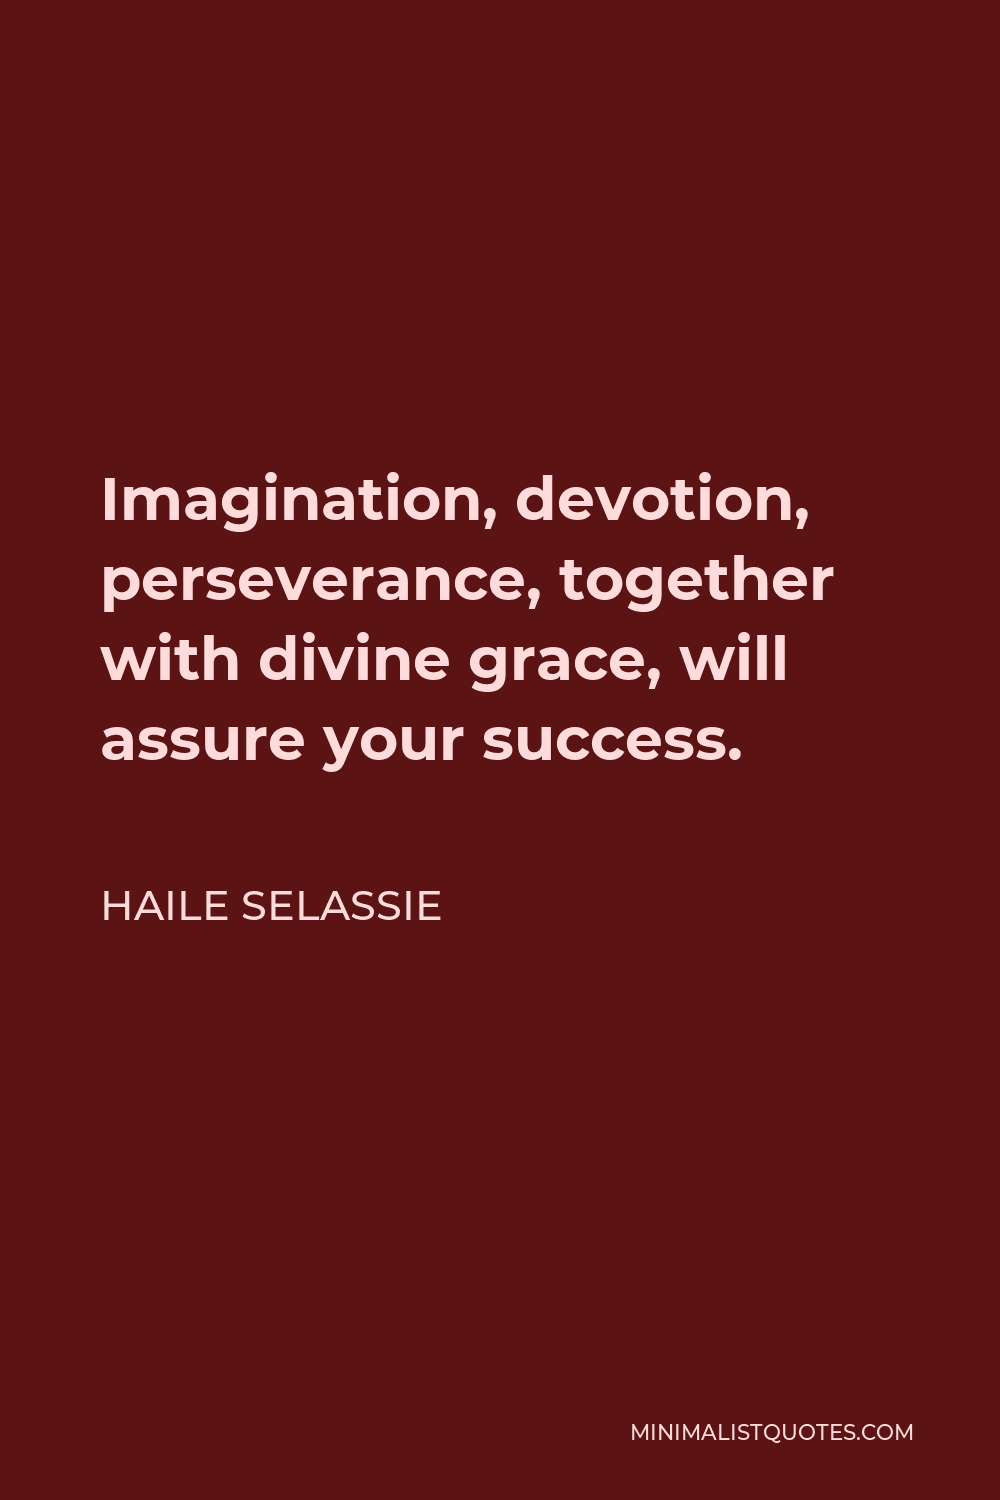 Haile Selassie Quote - Imagination, devotion, perseverance, together with divine grace, will assure your success.